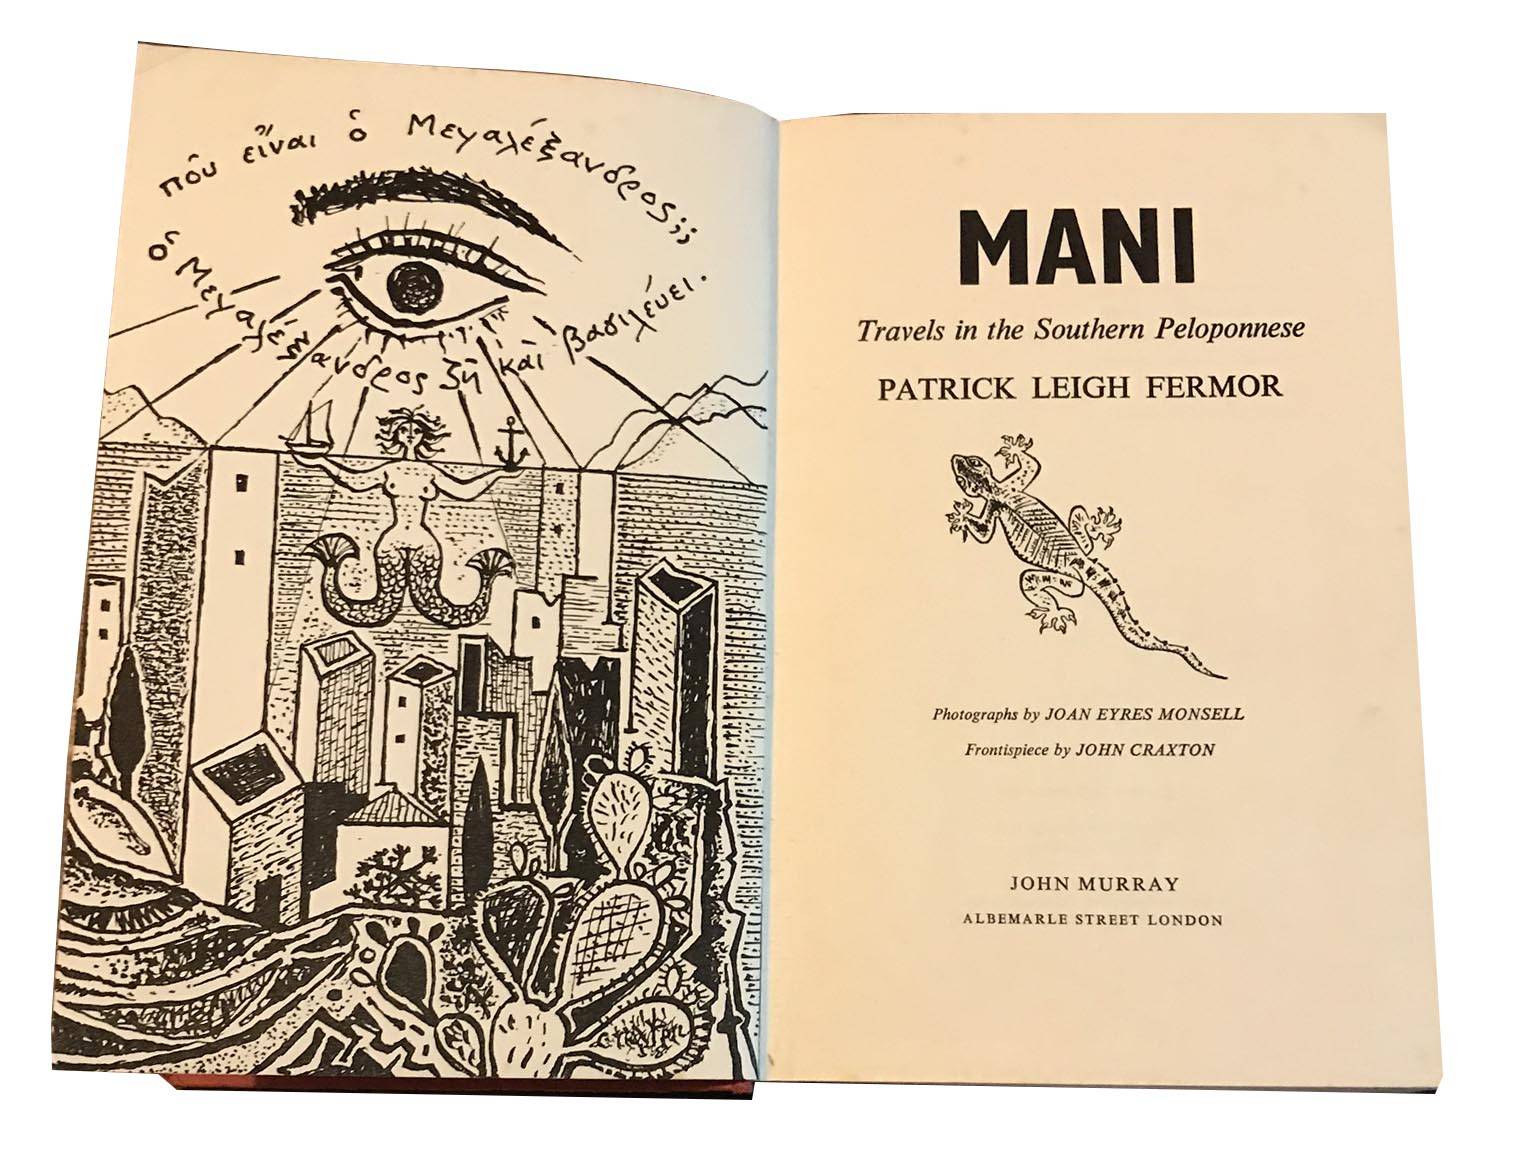 MANI, by Patrick Leigh FERMOR